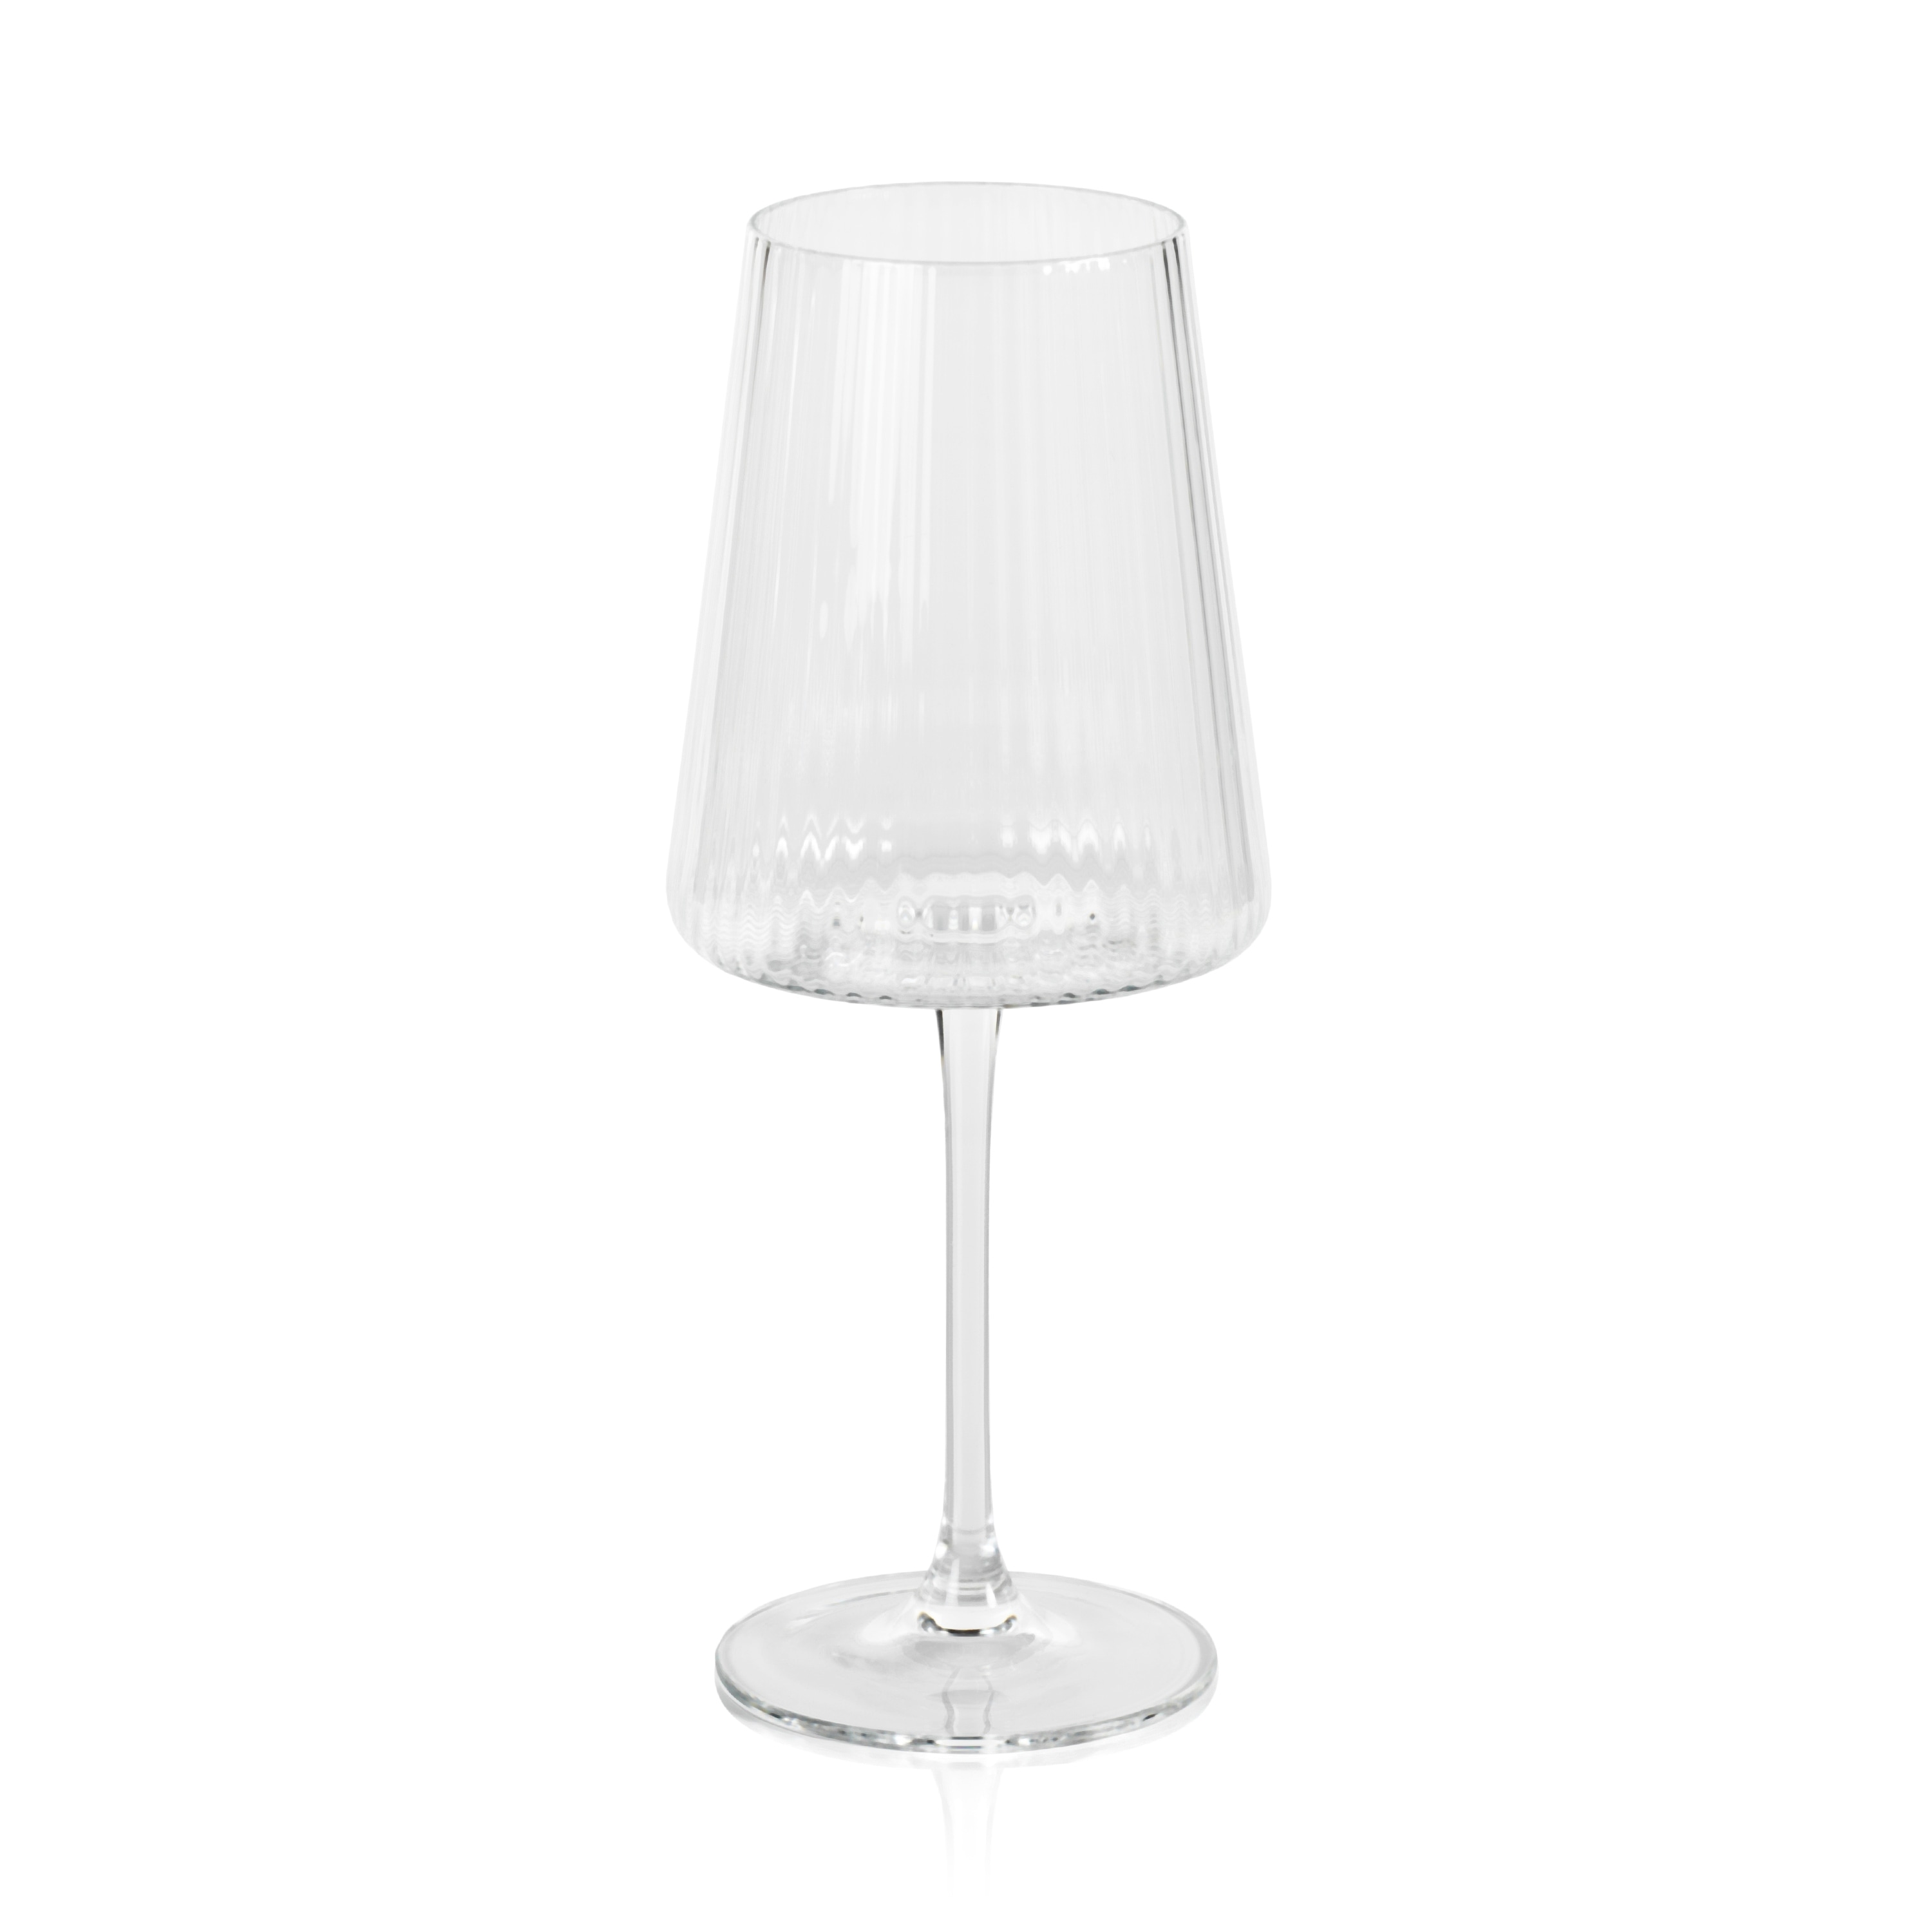 https://ak1.ostkcdn.com/images/products/is/images/direct/a77de2bd2c4e386f08ec6e1b0bcd196933db67fd/Benin-Fluted-Textured-Wine-Glasses%2C-Set-of-4.jpg